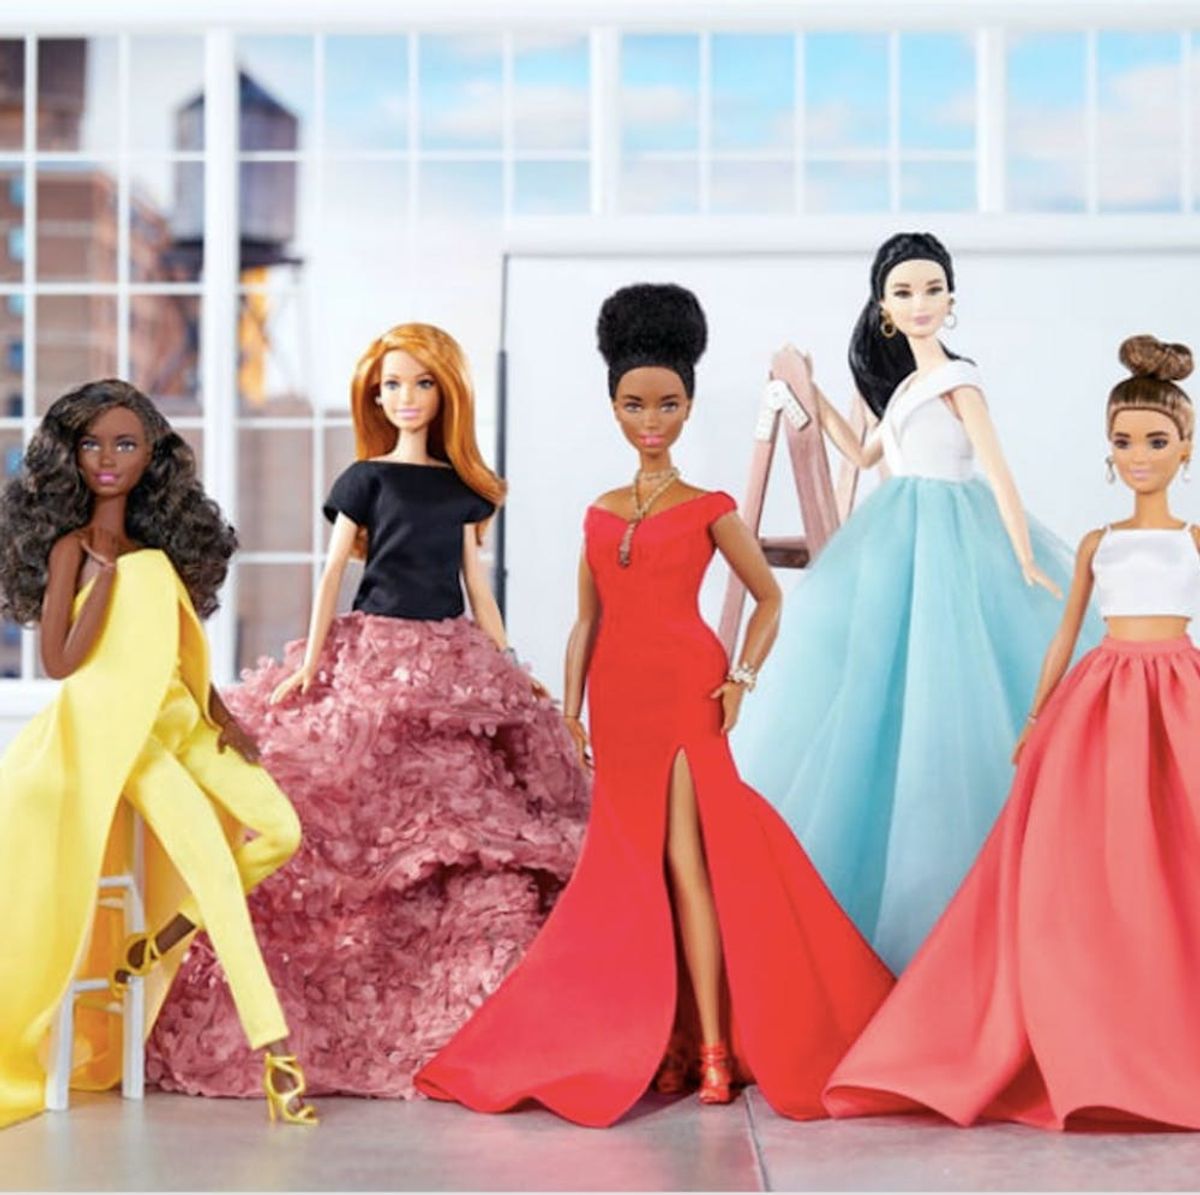 Sorry Barbie, But Your New Squad Isn’t Nearly Body-Positive Enough